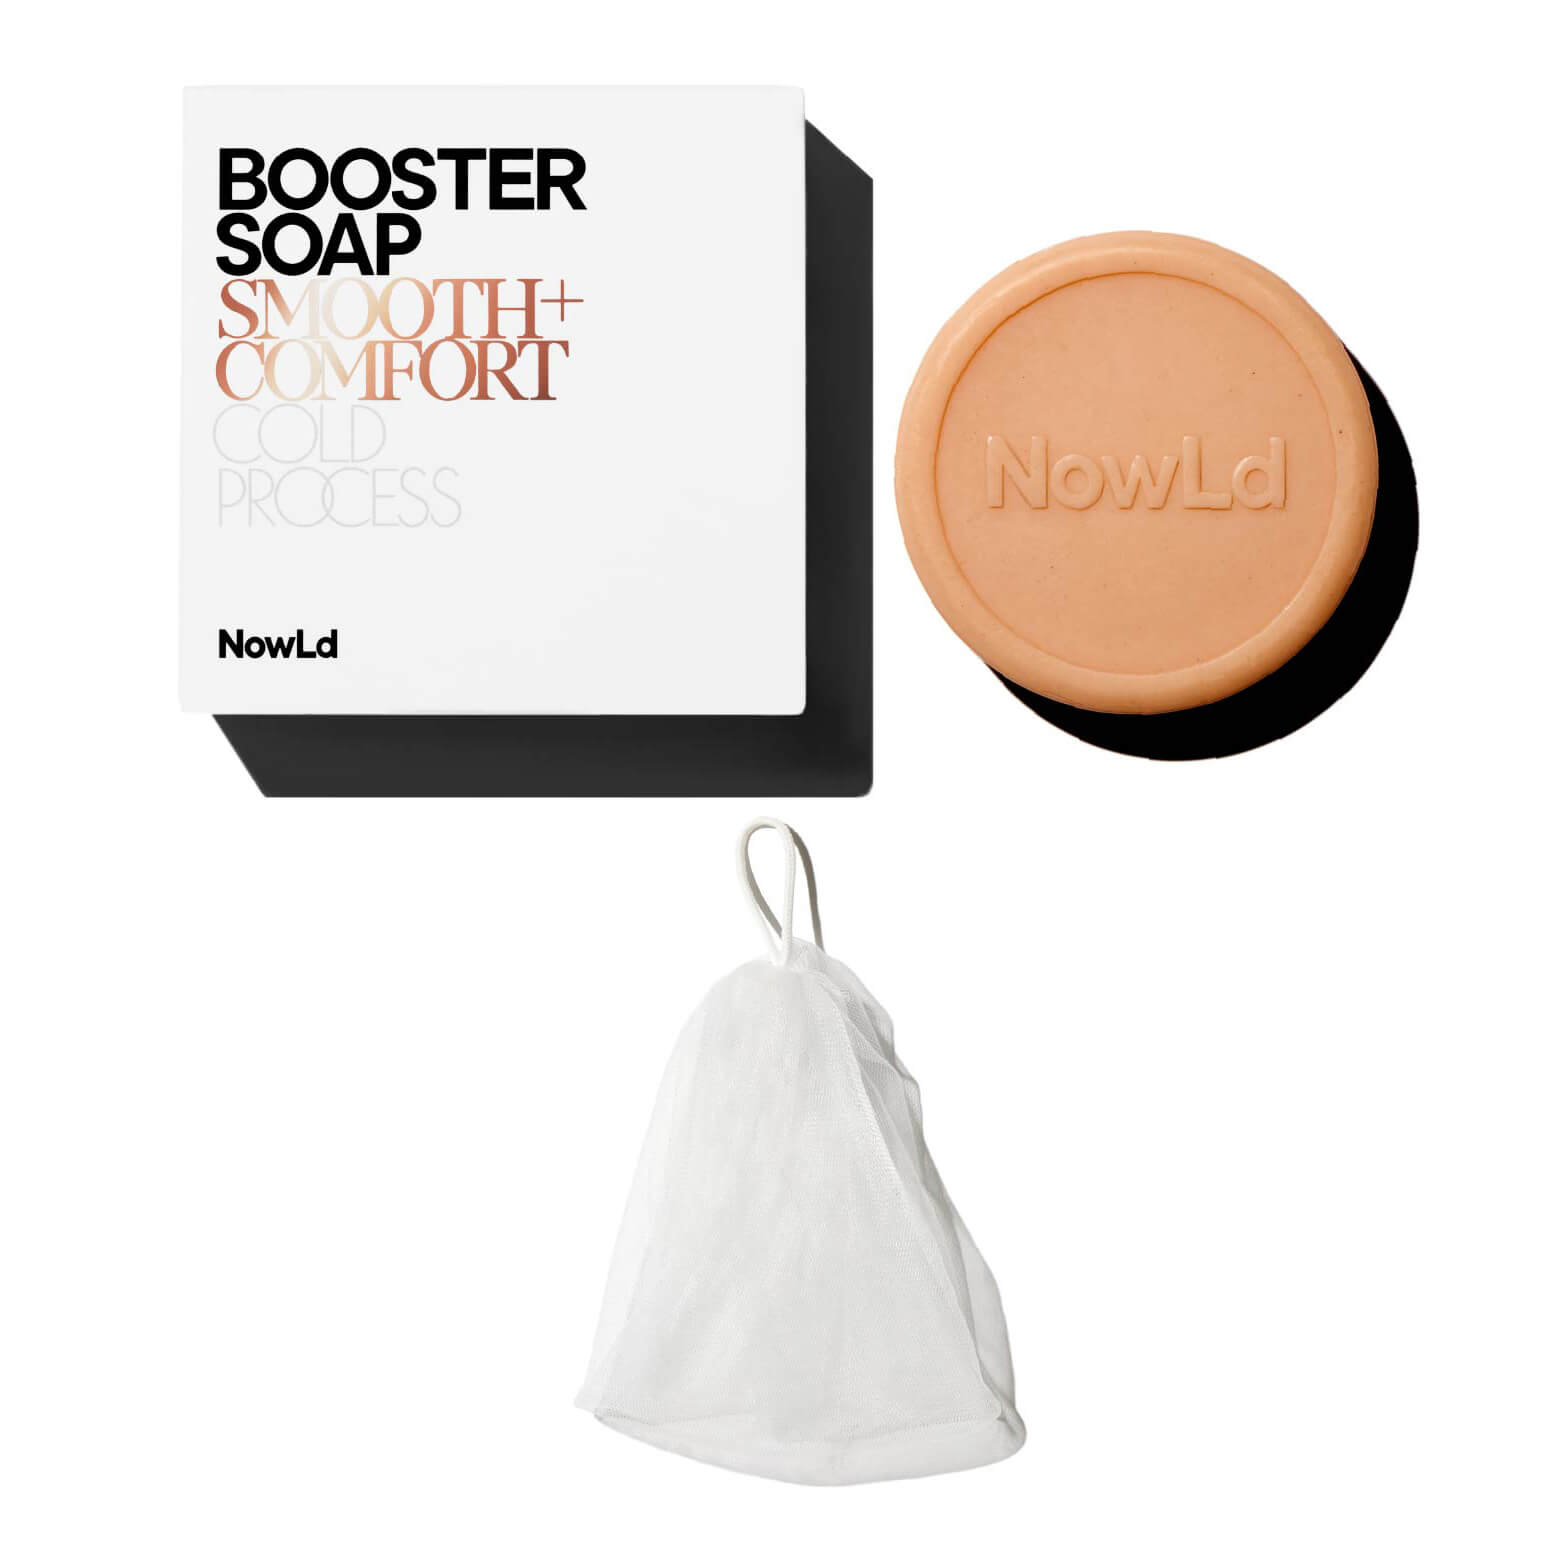 NowLd｜Booster Soap｜Product Shot